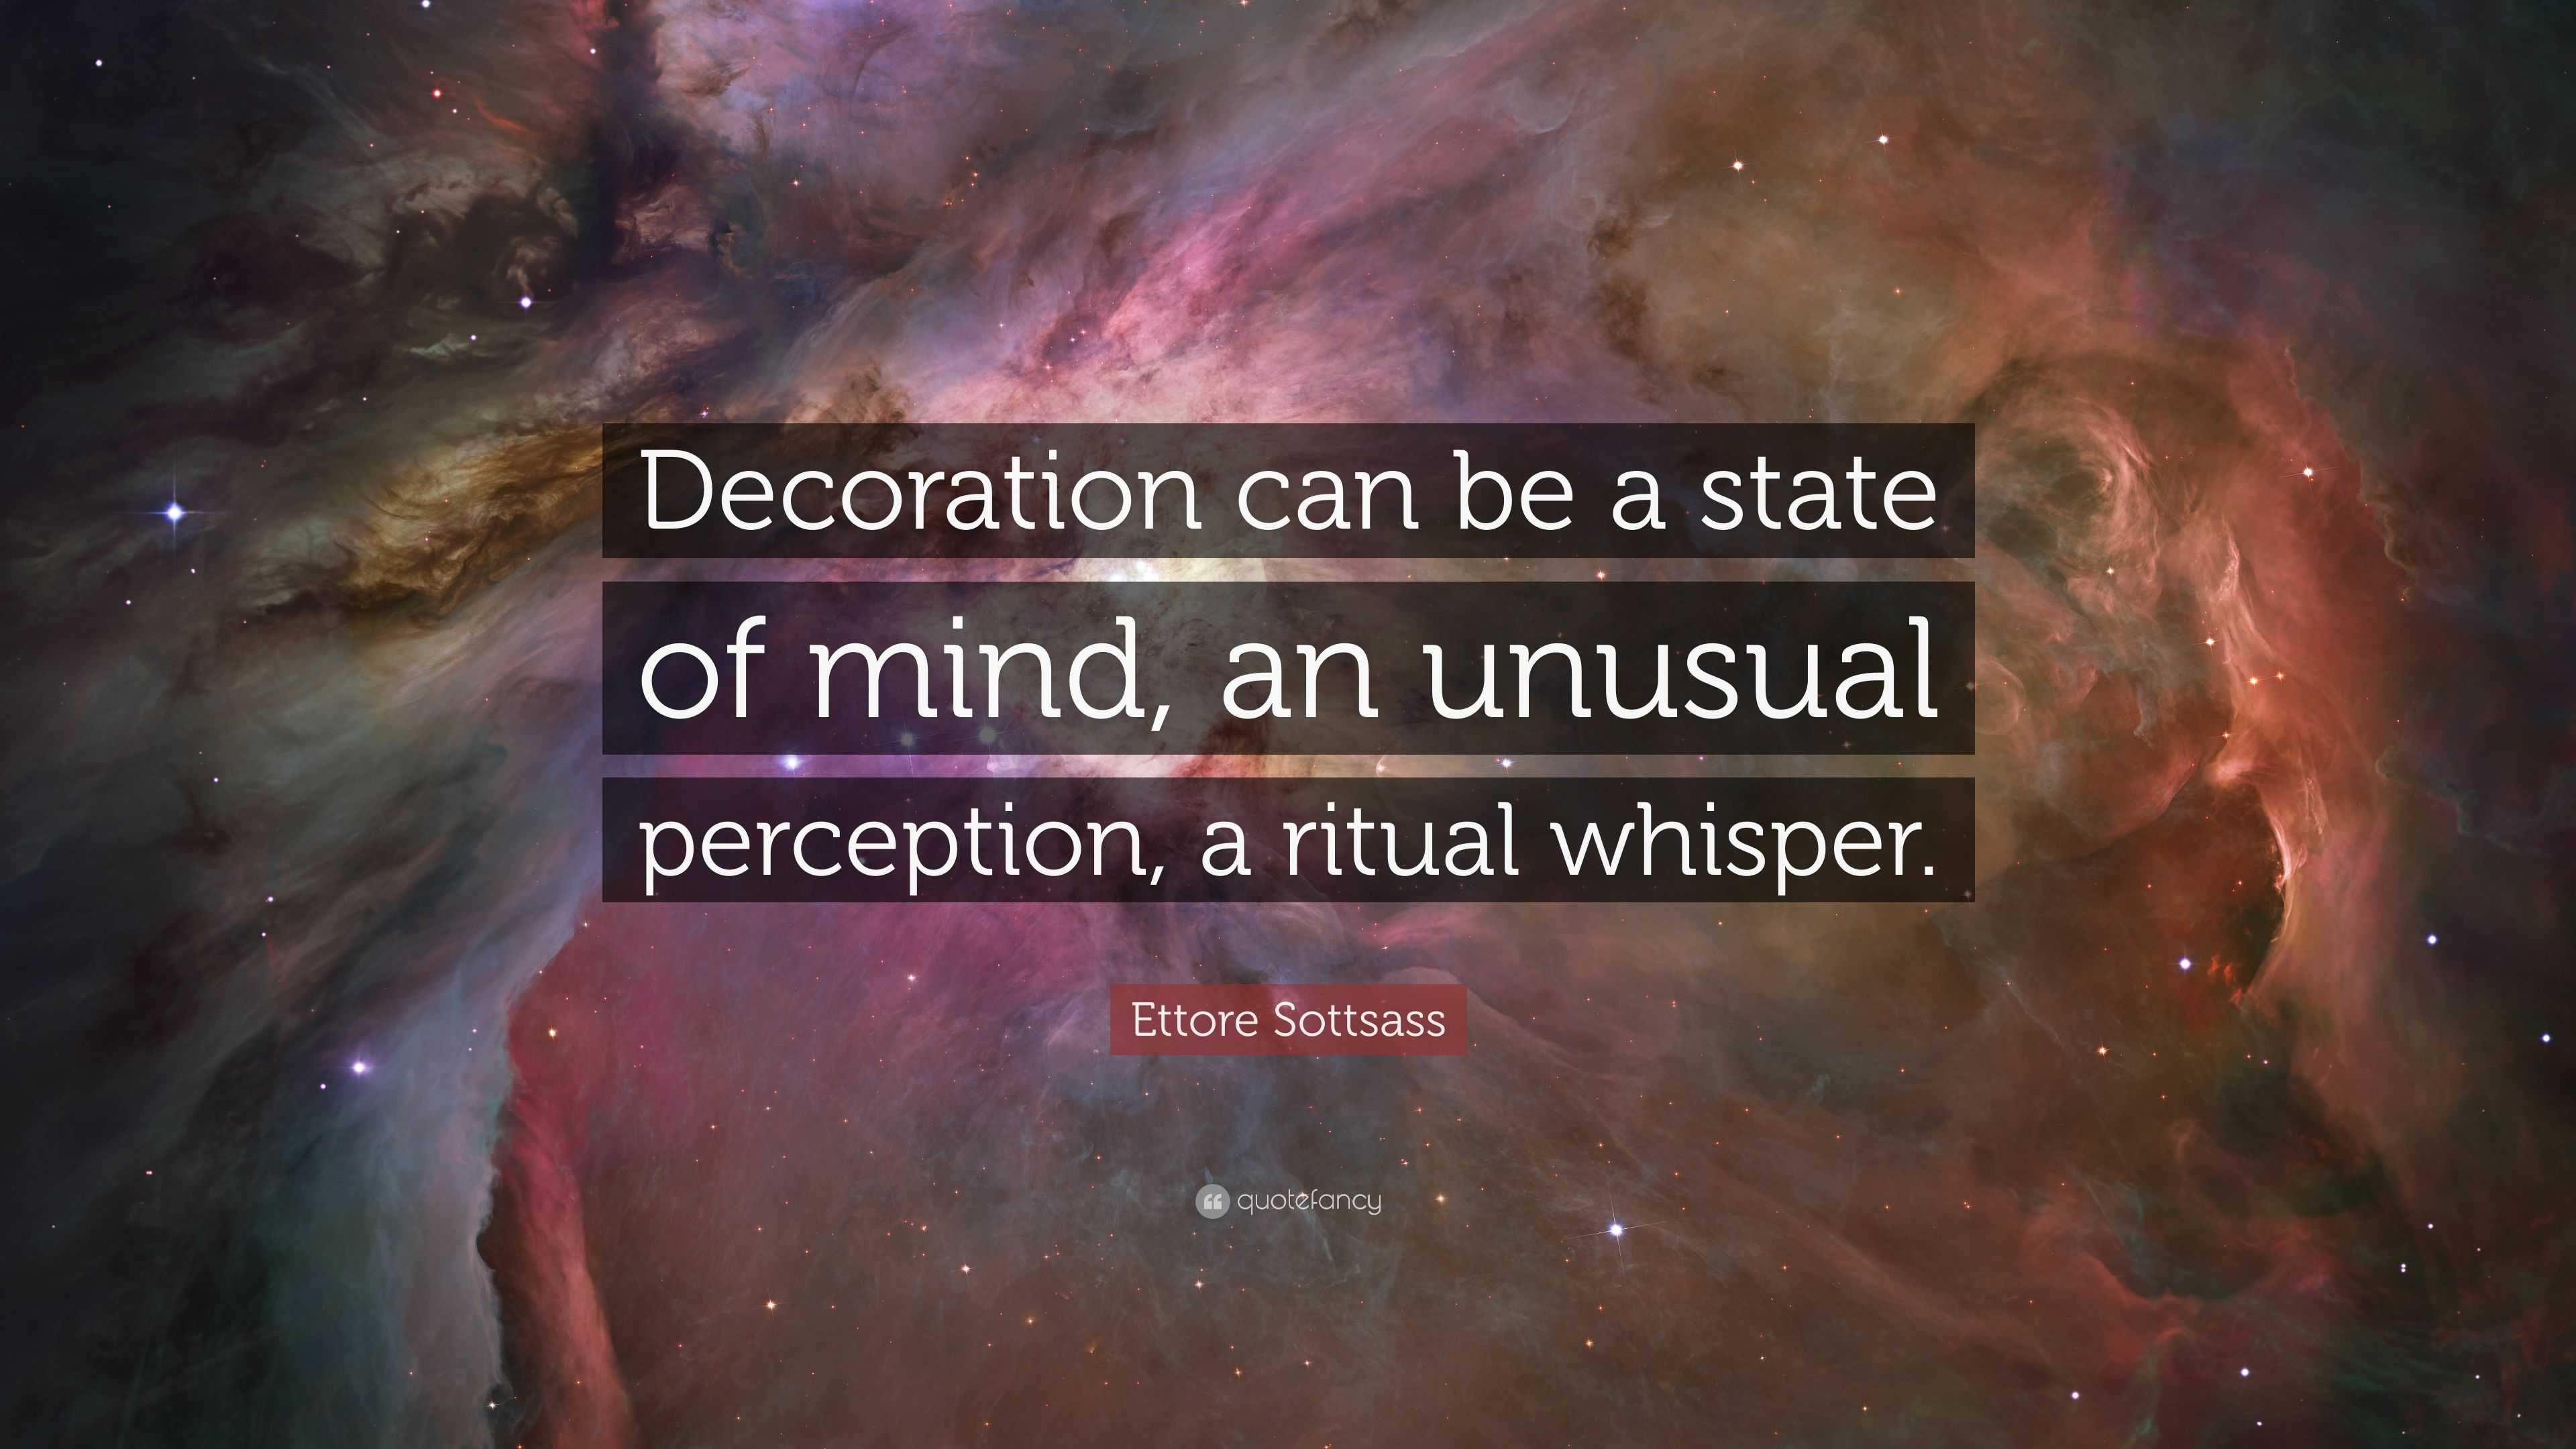 Ettore Sottsass Quote: “Decoration can be a state of mind, an ...